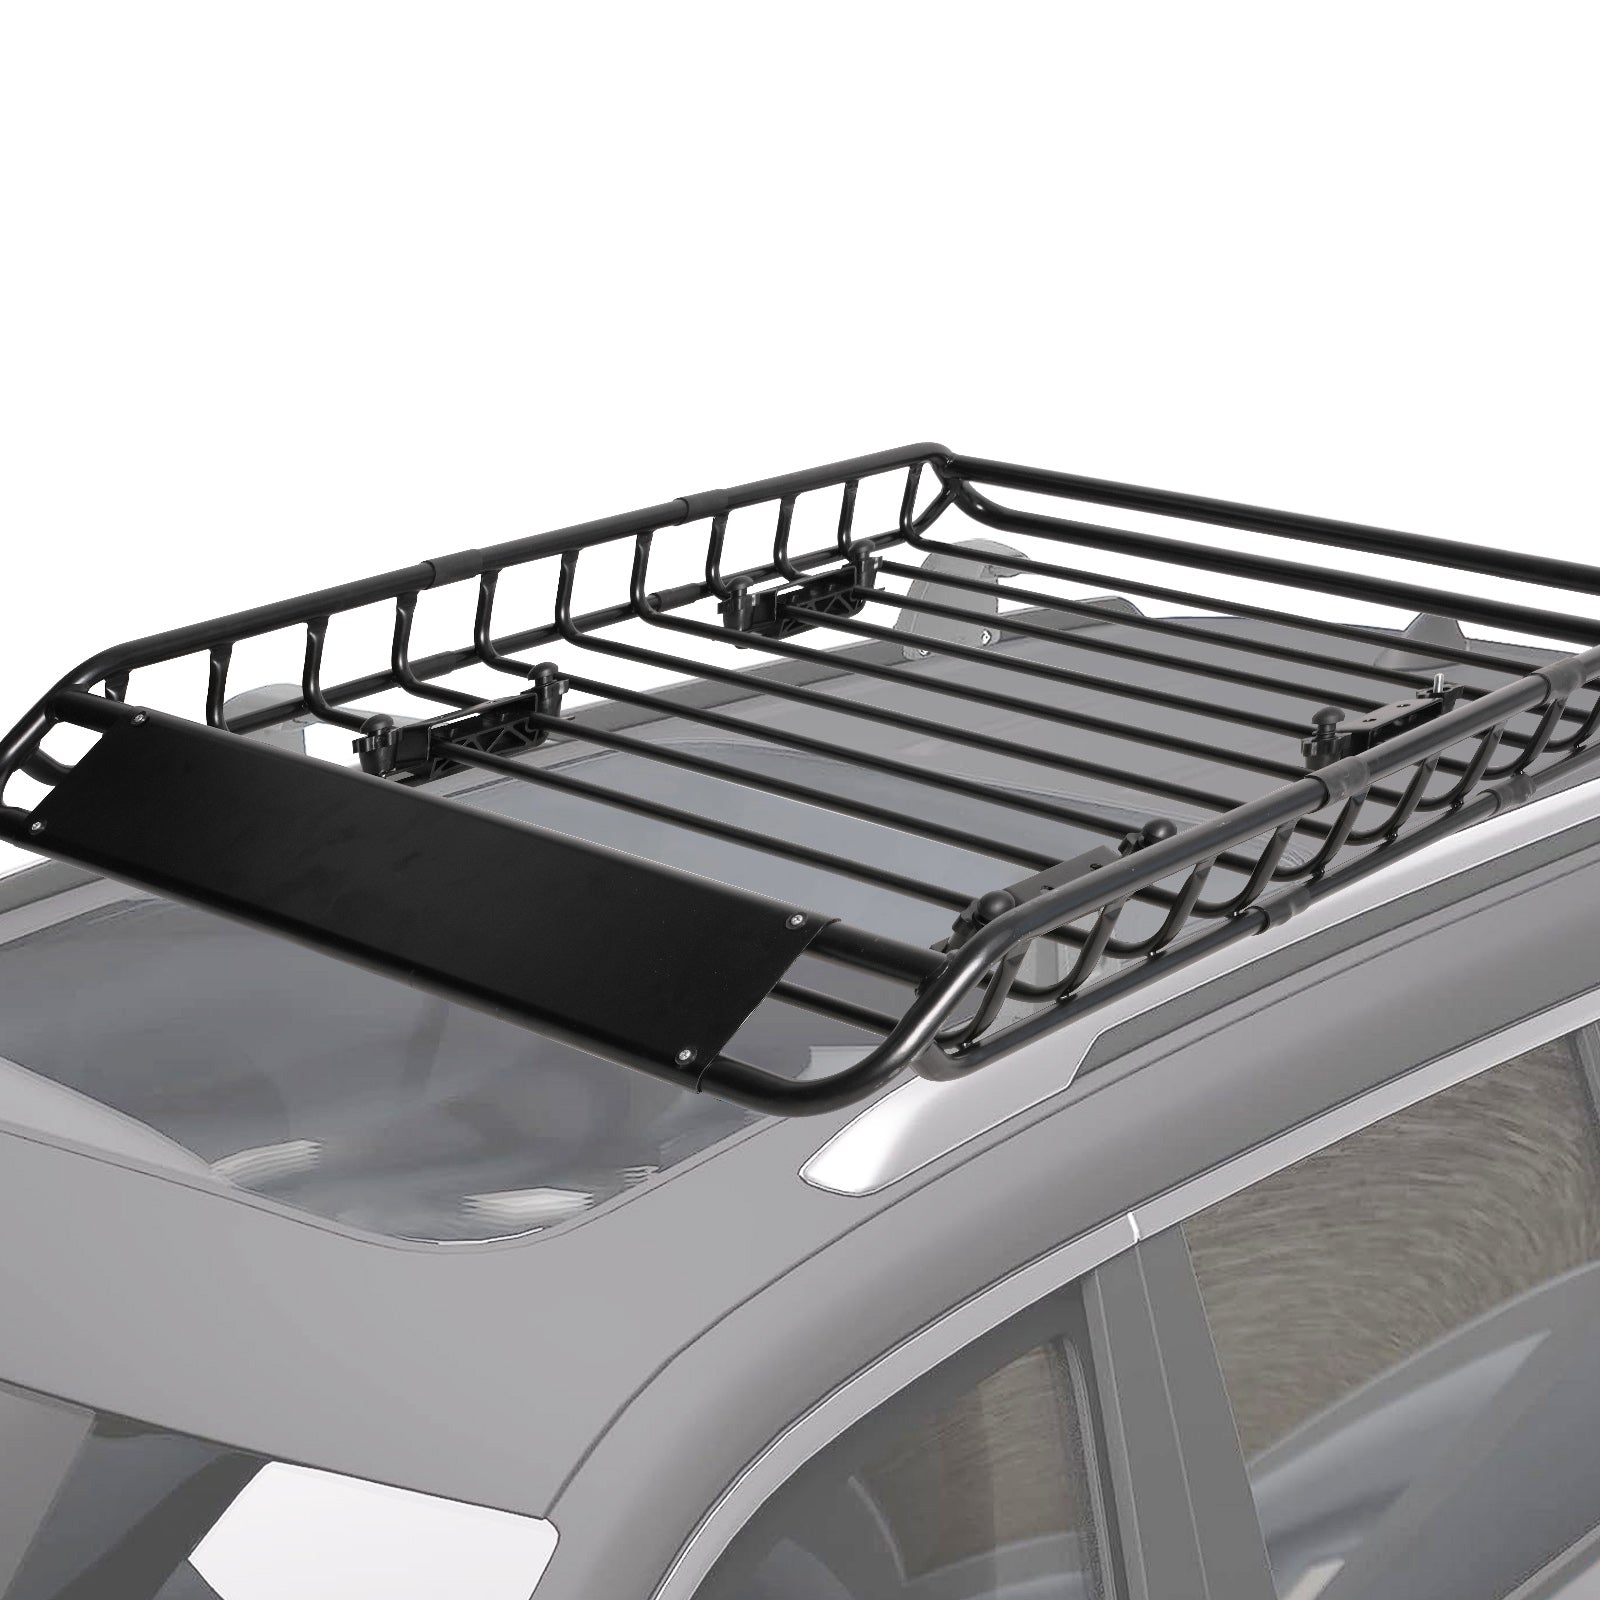 45.8"x 36.2" Universal Roof Rack Basket Rooftop Cargo Rack Luggage Holder for SUV Truck and Car, Black